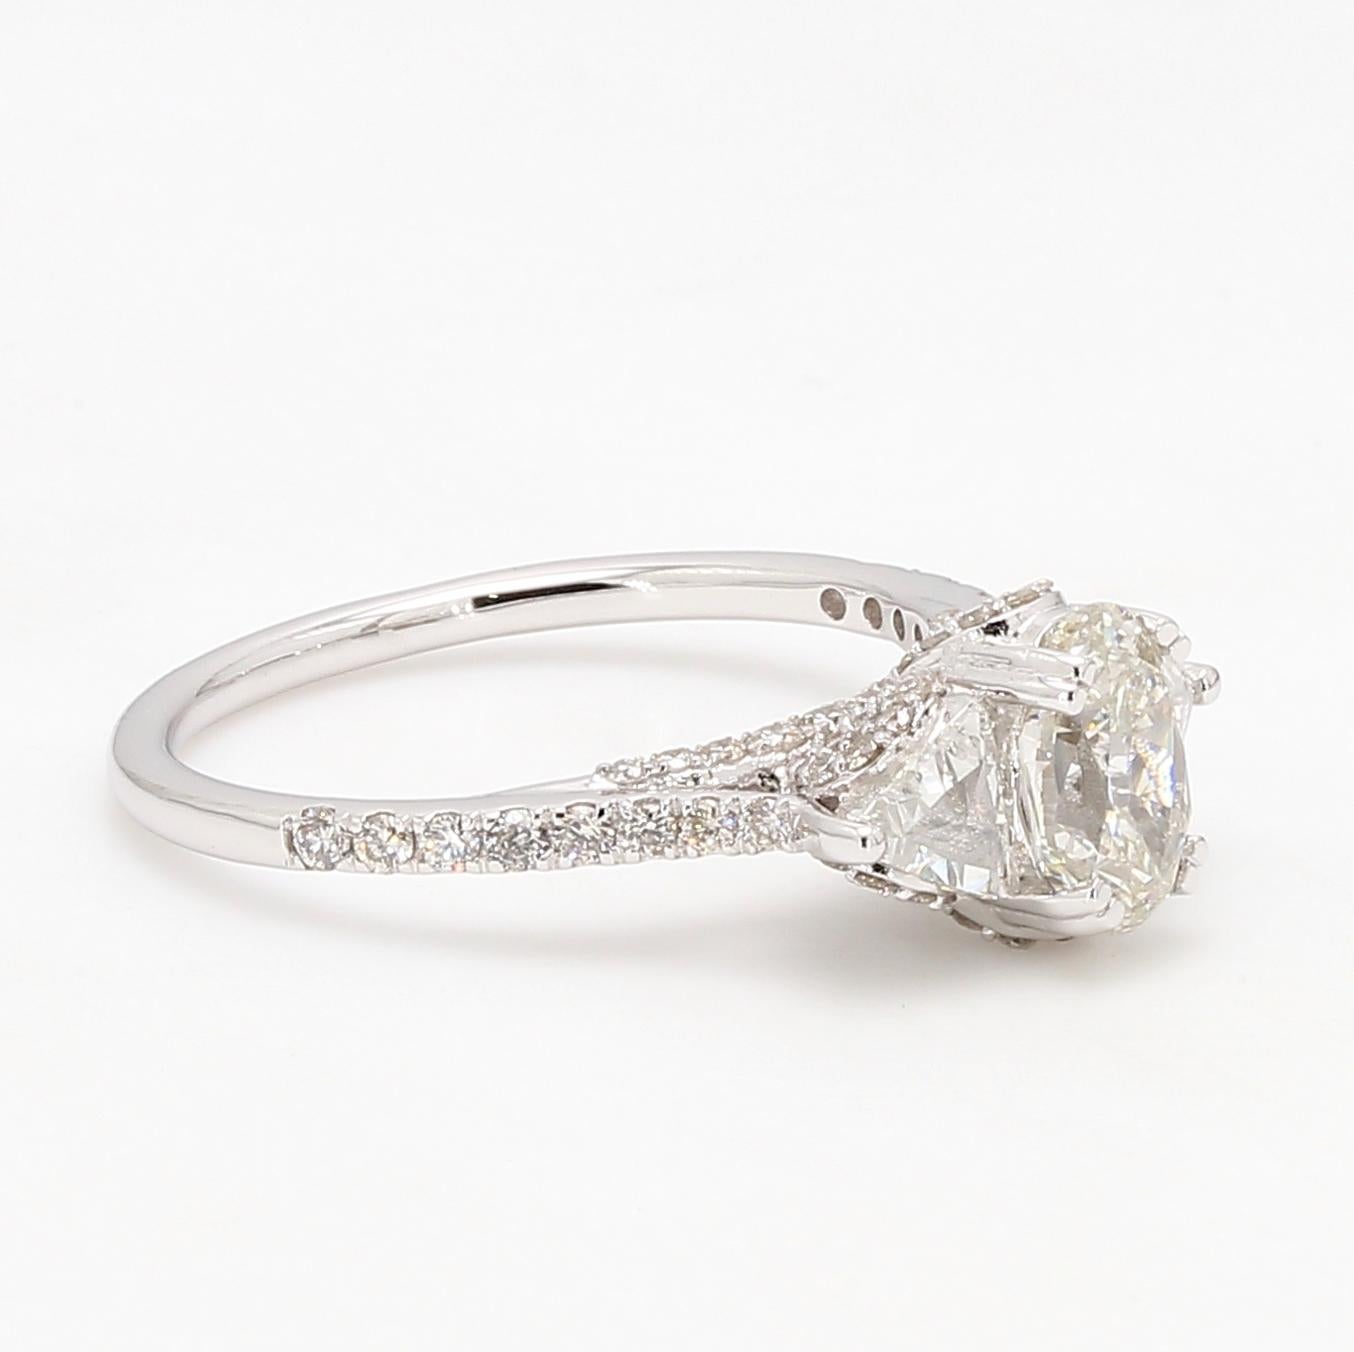 PANIM 18k White Gold European Old Cut Diamond Engagement Ring

Stunningly created in the Art Deco era, this sophisticated vintage-inspired piece! An eye-catching three-stone diamond ring. A 1 carat old cut diamond in the centre of the ring catches